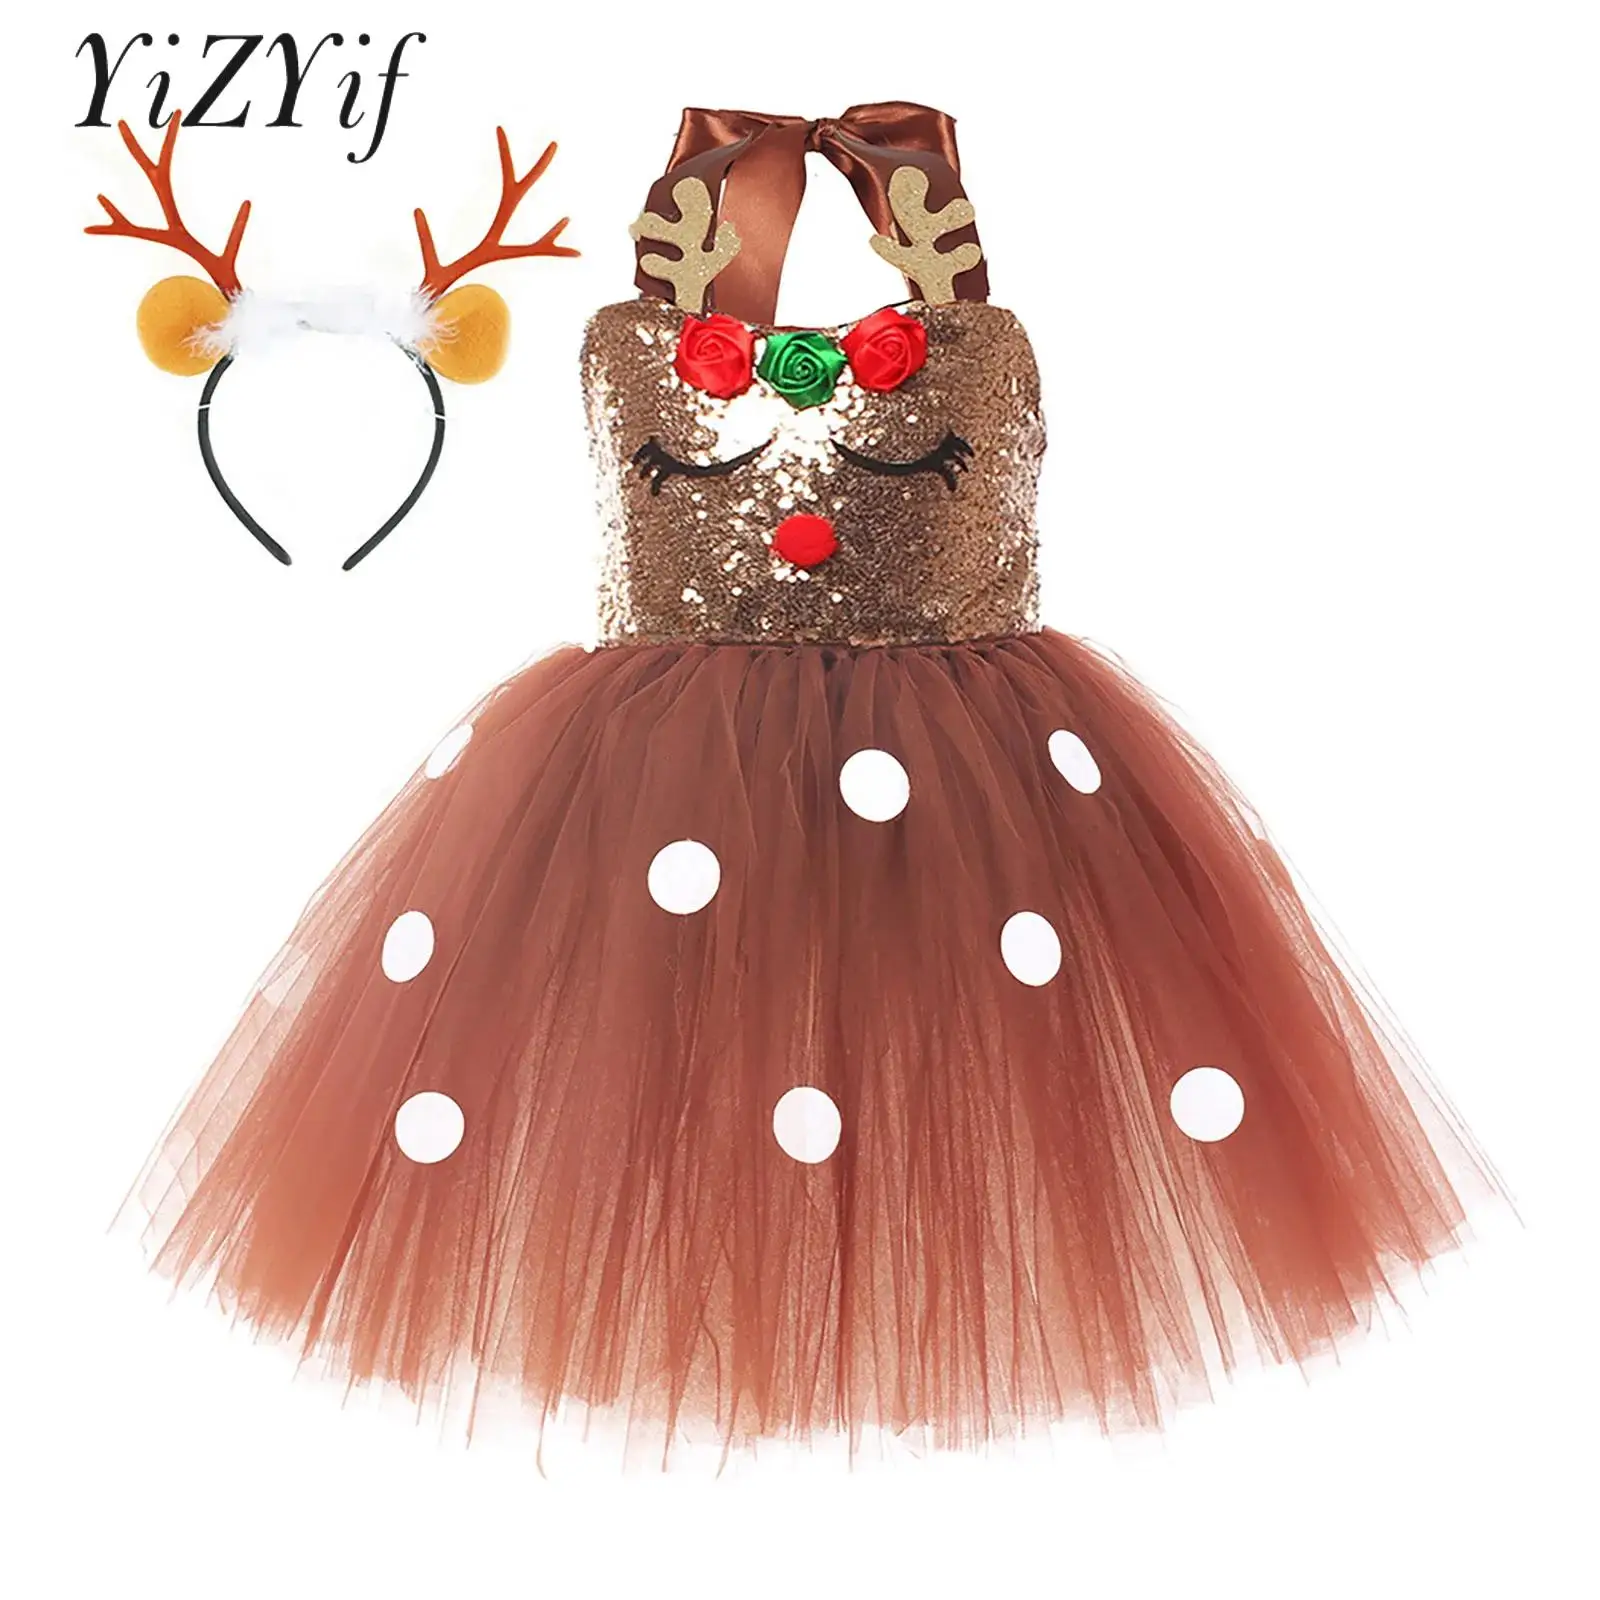 

Kids Girls Christmas Reindeer Costume Halter Neck Sequins Tutu Dress with Deer Hair Hoop for Role Play Party Cosplay Dress Up